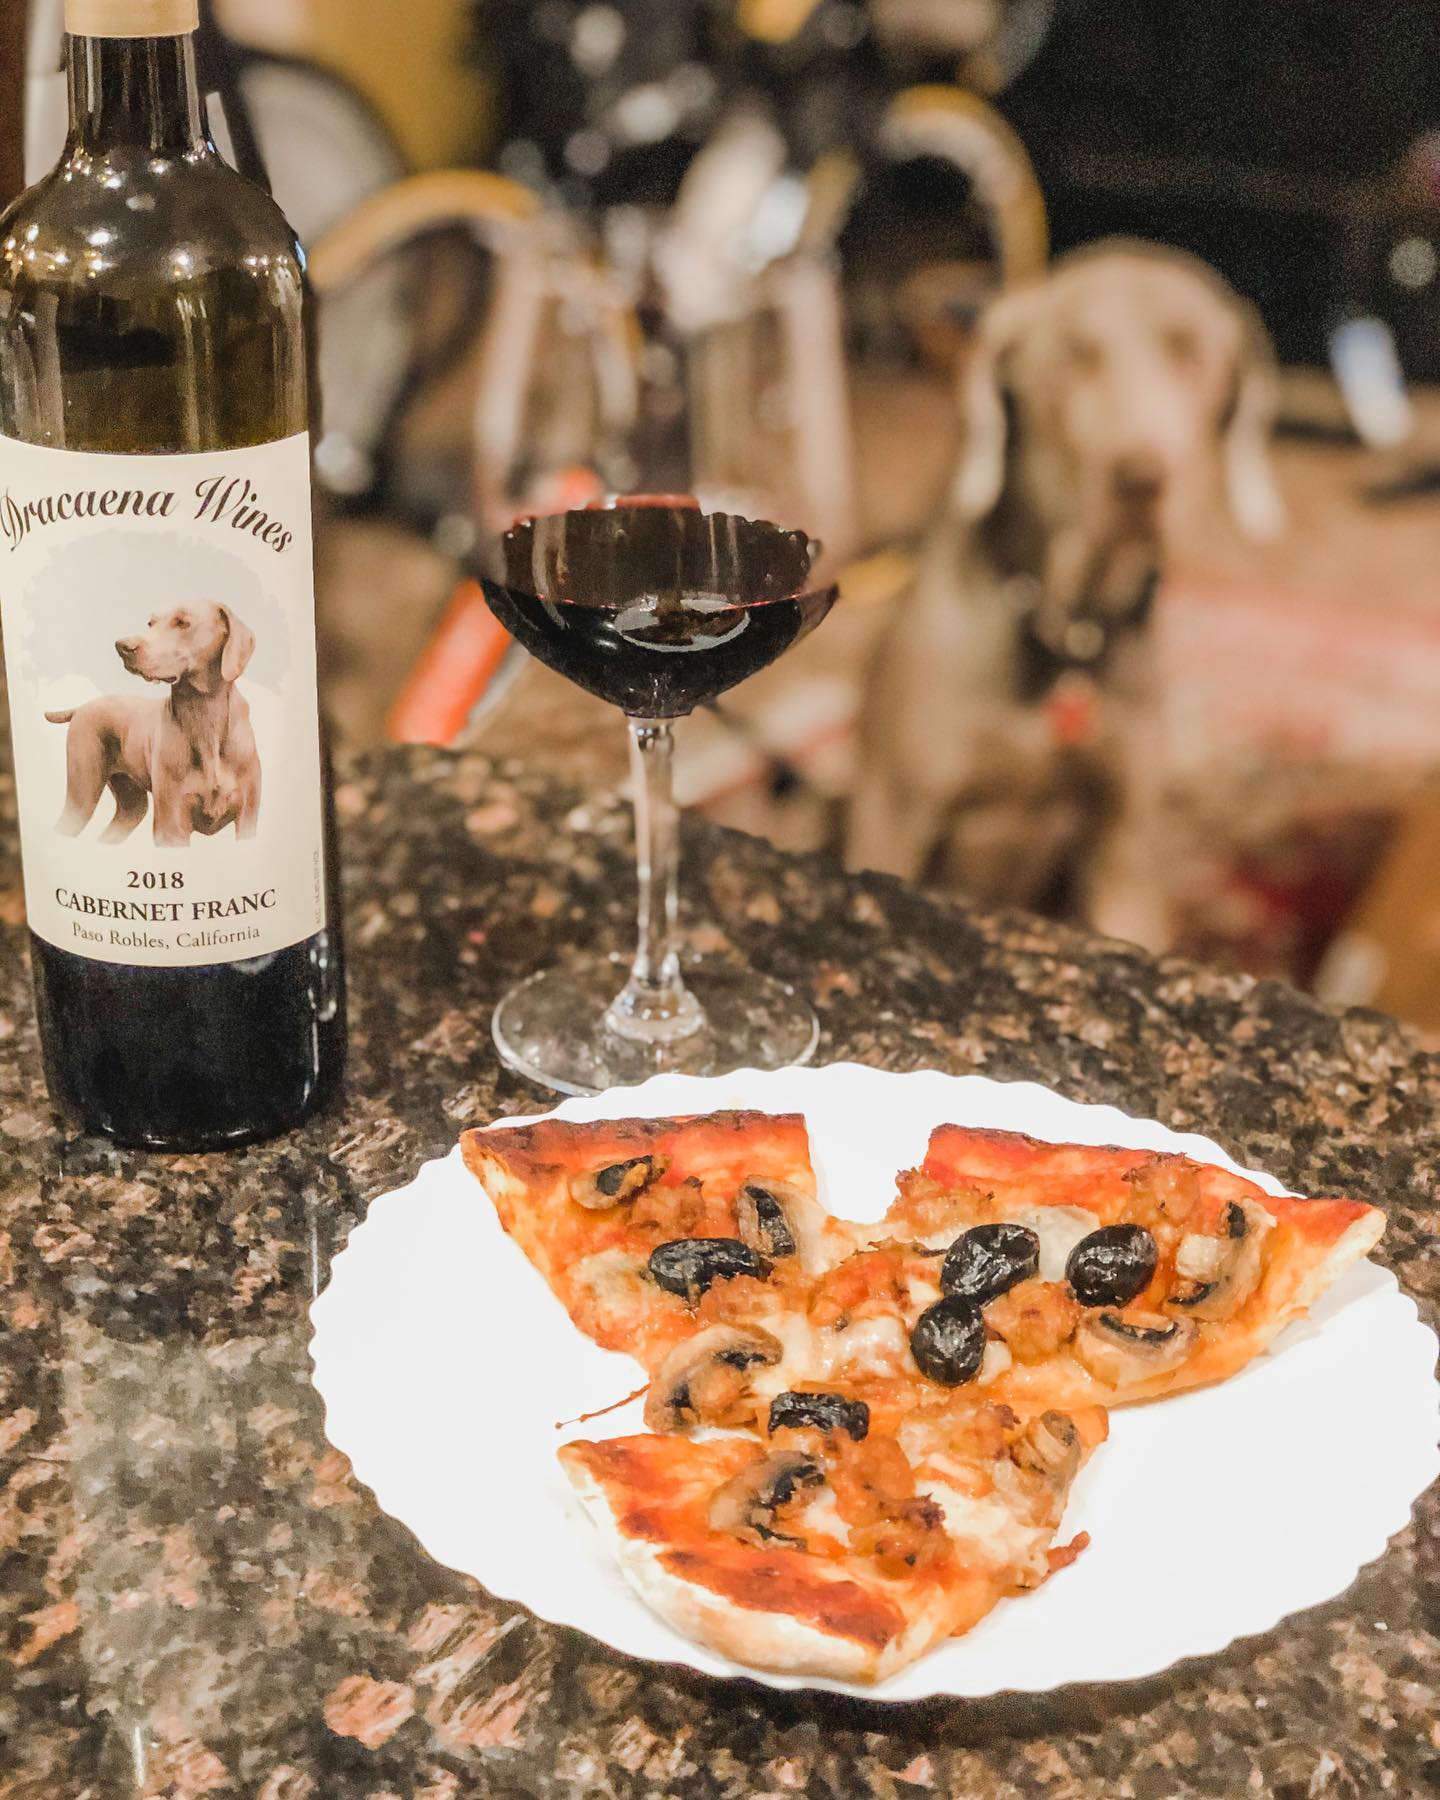 I’m glad I “nursed” this bottle of @dracaenawines Cab Franc because I had something to go with my leftover pizza for #NationalPizzaDay! 🤣Bonus background cameo of my own Weim wanting a bite of my supper #itwasmeanttobe #pizza #wine #supportsmallbusiness [instagram]